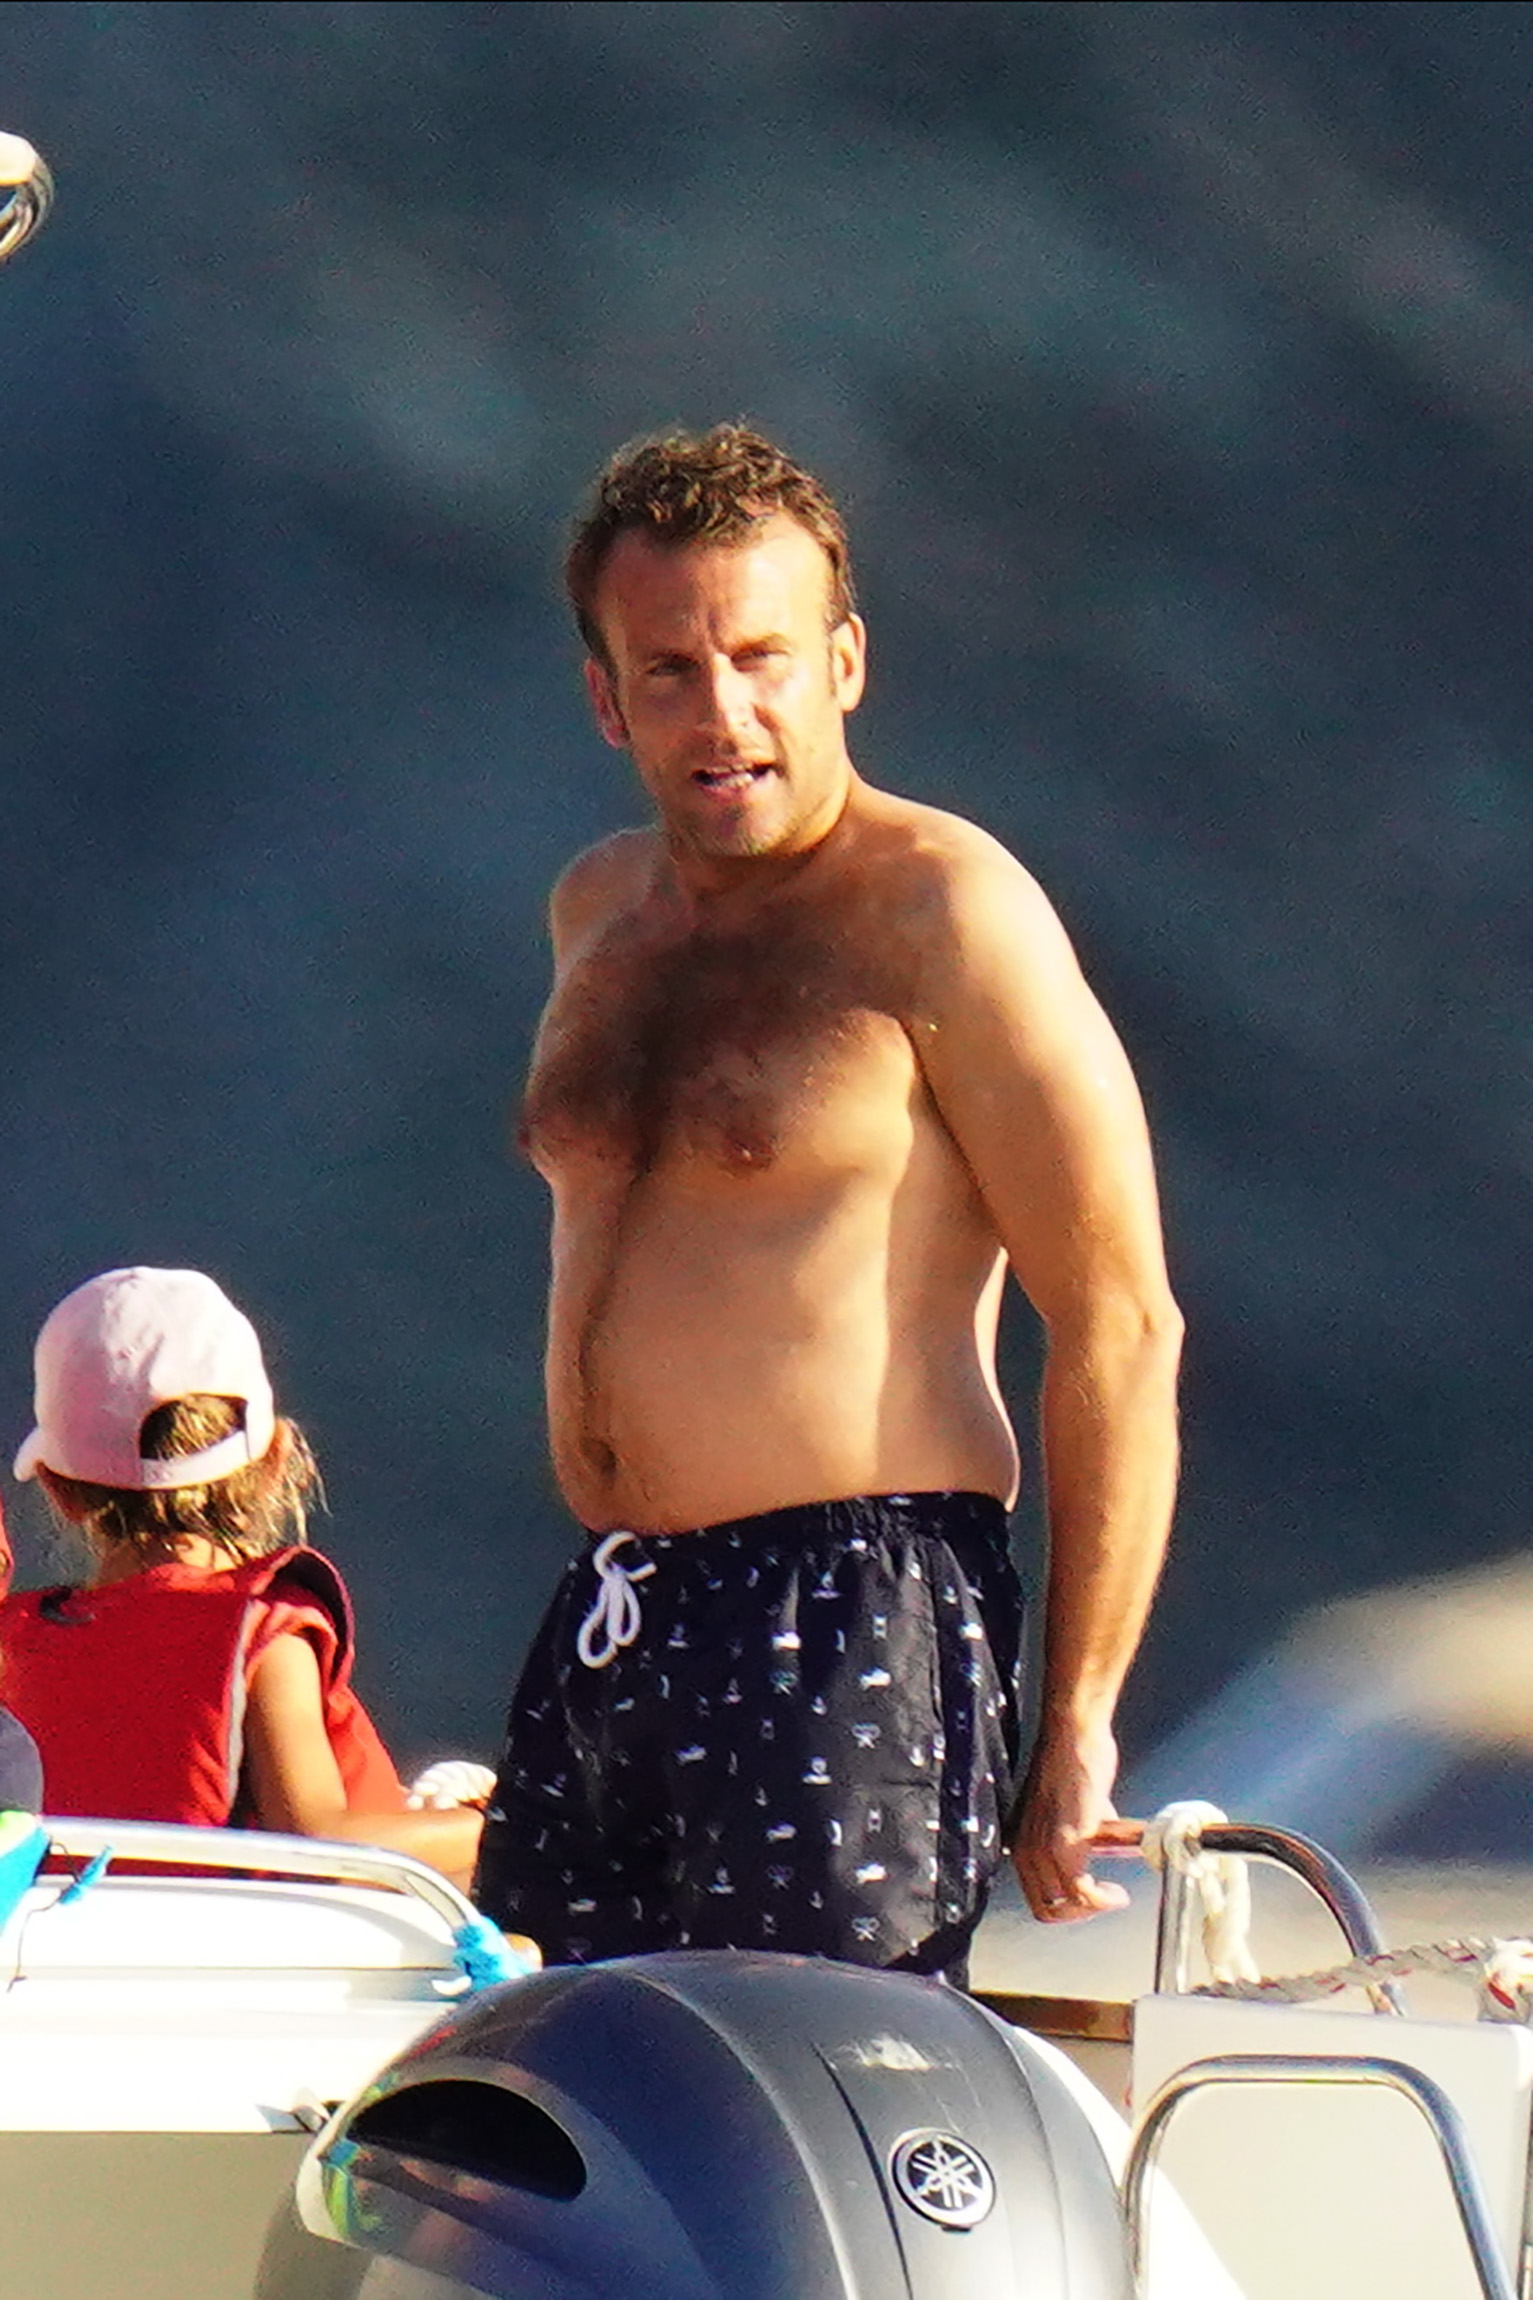 PREMIUM EXCLUSIVE - STRICTLY NO WEB NO BLOG BEFORE THURSDAY 13TH AUGUST 2020 -

French president Emmanuel Macron and wife Brigitte seen enjoying their holiday with their family during a boat day at Porquerolles island in South of France.
01 Aug 2020
 The First Lady looks more sculptural than ever.,Image: 551857064, License: Rights-managed, Restrictions: ONLY Australia, Canada, Croatia, Denmark, Greece, Ireland, Israel, Japan, Lithuania, New Zealand, Norway, Poland, Portugal, Romania, Slovakia, Slovenia, South Africa, South Korea, Taiwan, Thailand, Turkey, Ukraine, United Arab Emirates, United Kingdom, United States, Model Release: no, Credit line: MEGA / The Mega Agency / Profimedia